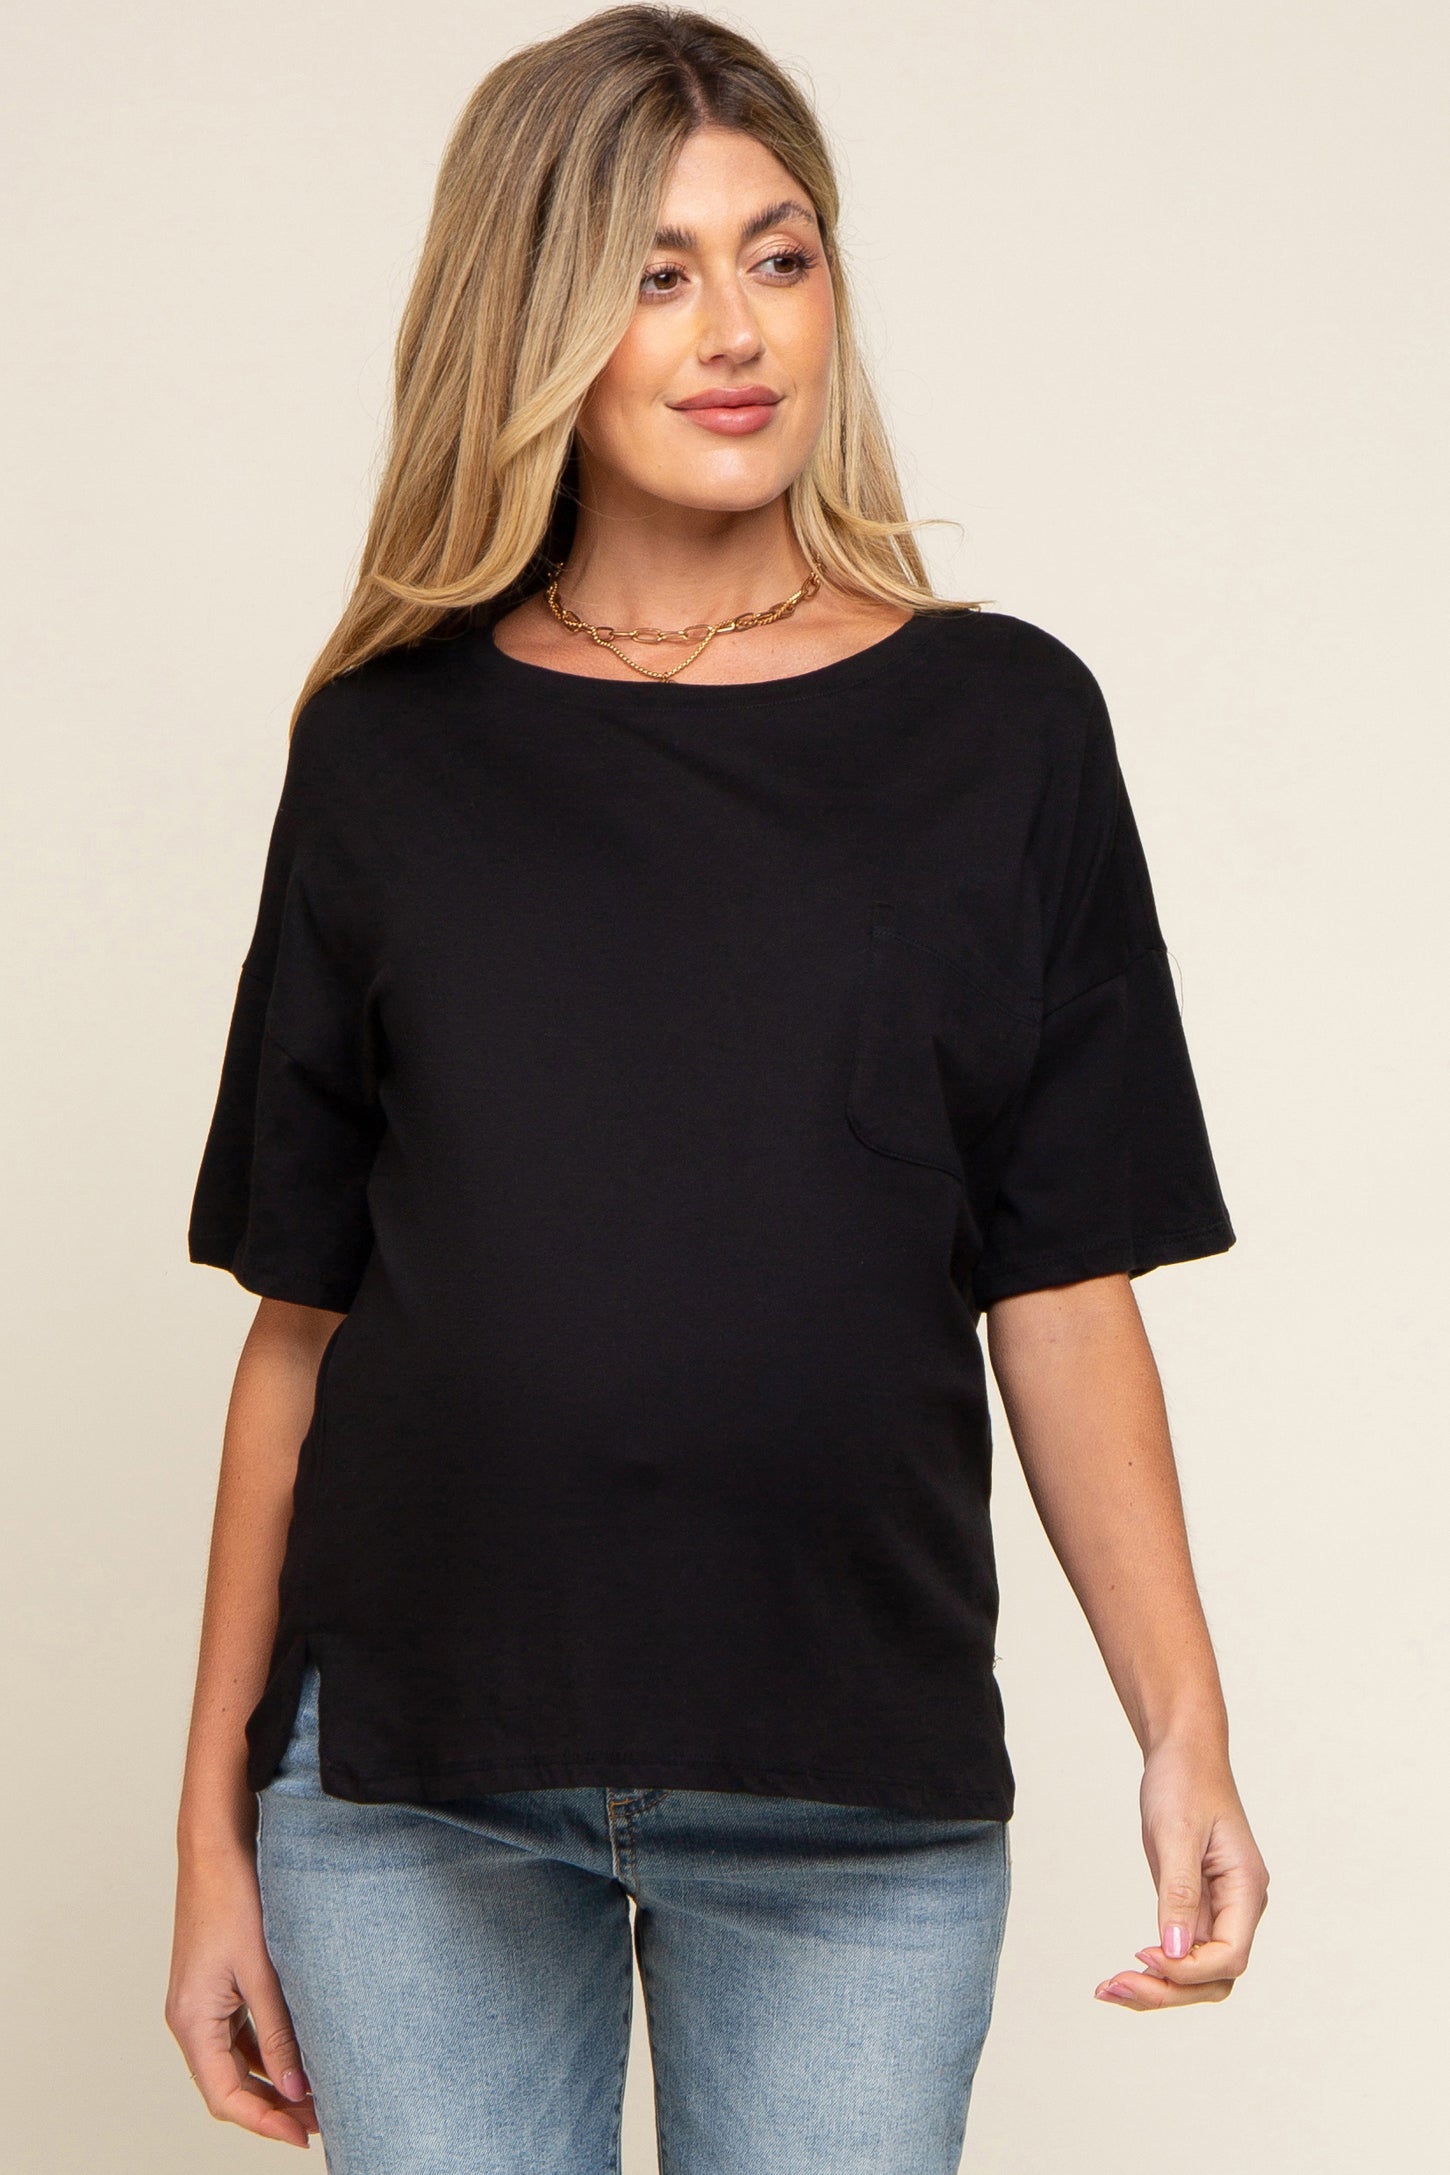 Black Short Sleeve Pocketed Maternity Top